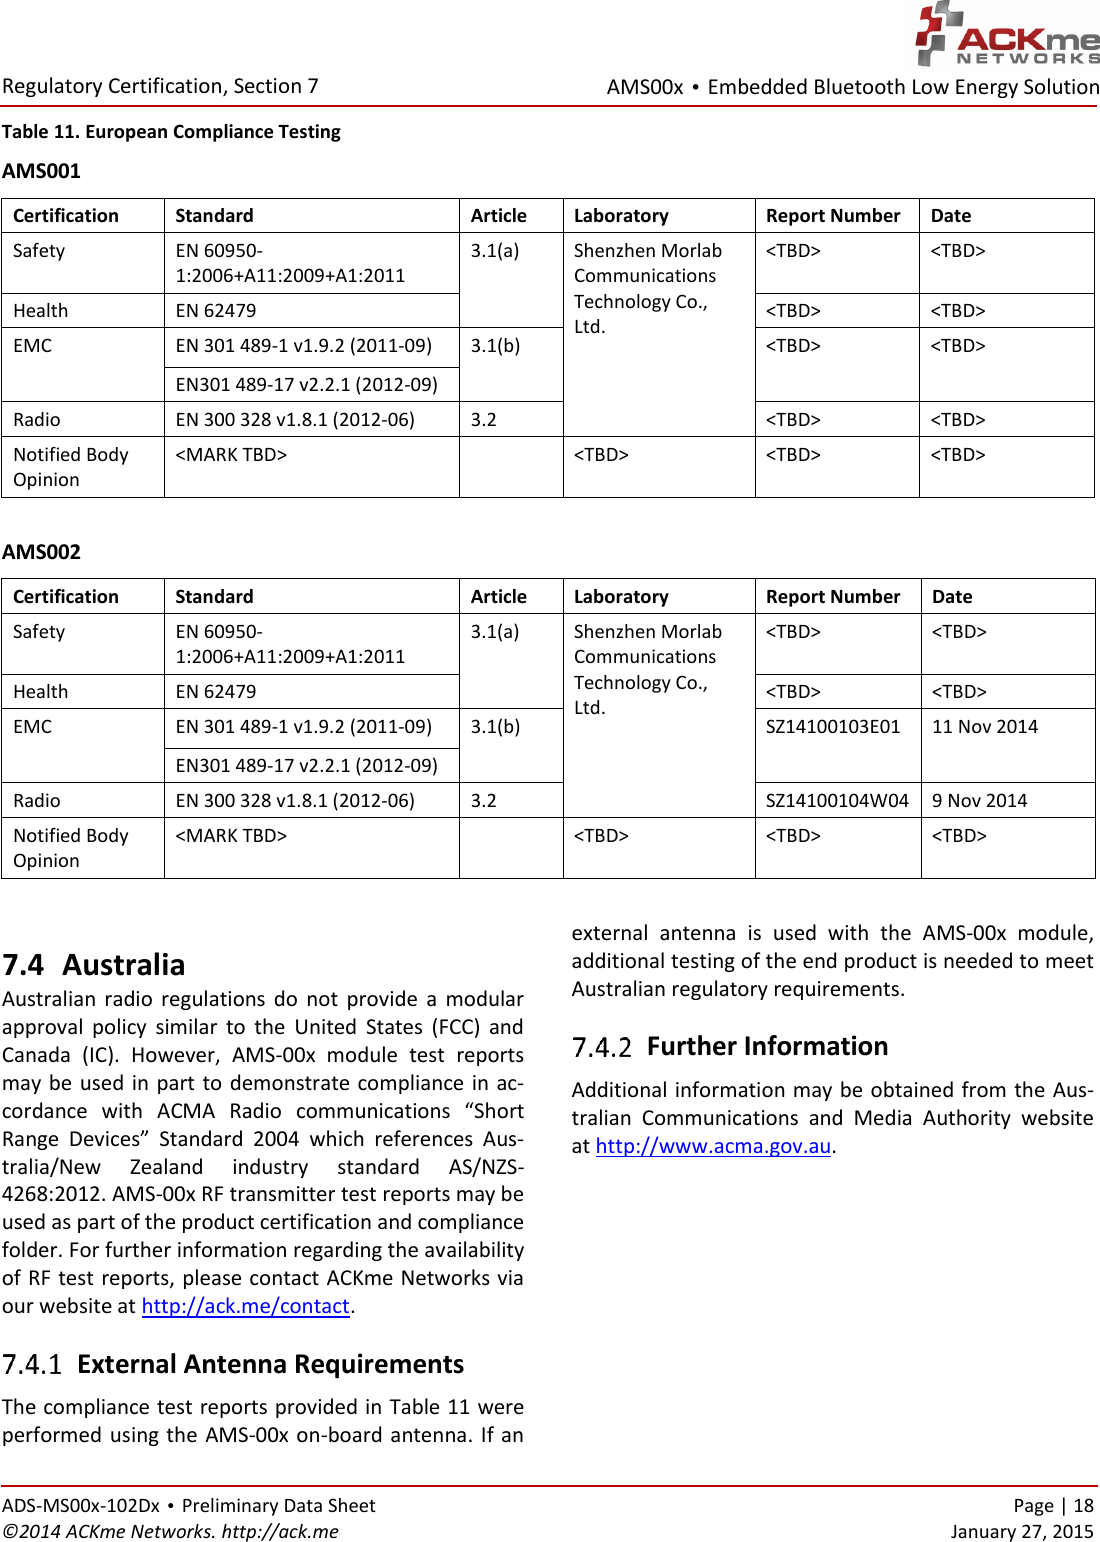 AMS00x • Embedded Bluetooth Low Energy Solution  Regulatory Certification, Section 7   ADS-MS00x-102Dx • Preliminary Data Sheet    Page | 18 ©2014 ACKme Networks. http://ack.me    January 27, 2015 Table 11. European Compliance Testing AMS001 Certification Standard Article Laboratory Report Number Date Safety EN 60950-1:2006+A11:2009+A1:2011 3.1(a)  Shenzhen Morlab Communications Technology Co., Ltd. &lt;TBD&gt; &lt;TBD&gt; Health EN 62479&lt;TBD&gt; &lt;TBD&gt; EMC EN 301 489-1 v1.9.2 (2011-09) 3.1(b) &lt;TBD&gt; &lt;TBD&gt; EN301 489-17 v2.2.1 (2012-09) Radio EN 300 328 v1.8.1 (2012-06) 3.2 &lt;TBD&gt; &lt;TBD&gt; Notified Body Opinion &lt;MARK TBD&gt;  &lt;TBD&gt; &lt;TBD&gt; &lt;TBD&gt;  AMS002 Certification Standard Article Laboratory Report Number Date Safety EN 60950-1:2006+A11:2009+A1:2011 3.1(a)  Shenzhen Morlab Communications Technology Co., Ltd. &lt;TBD&gt; &lt;TBD&gt; Health EN 62479&lt;TBD&gt; &lt;TBD&gt; EMC EN 301 489-1 v1.9.2 (2011-09) 3.1(b) SZ14100103E01 11 Nov 2014 EN301 489-17 v2.2.1 (2012-09) Radio EN 300 328 v1.8.1 (2012-06) 3.2 SZ14100104W04 9 Nov 2014 Notified Body Opinion &lt;MARK TBD&gt;  &lt;TBD&gt; &lt;TBD&gt; &lt;TBD&gt;  7.4 Australia Australian  radio  regulations  do  not  provide  a  modular approval  policy  similar  to  the  United  States  (FCC)  and Canada  (IC).  However,  AMS-00x  module  test  reports may be used in  part to demonstrate compliance in ac-cordance  with  ACMA  Radio  communications  “Short Range  Devices”  Standard  2004  which  references  Aus-tralia/New  Zealand  industry  standard  AS/NZS-4268:2012. AMS-00x RF transmitter test reports may be used as part of the product certification and compliance folder. For further information regarding the availability of RF test reports, please contact ACKme Networks via our website at http://ack.me/contact.  External Antenna Requirements The compliance test reports provided in Table 11 were performed using the AMS-00x on-board antenna. If an external  antenna  is  used  with  the  AMS-00x  module, additional testing of the end product is needed to meet Australian regulatory requirements.  Further Information Additional information may be obtained from the Aus-tralian  Communications  and  Media  Authority  website at http://www.acma.gov.au. 